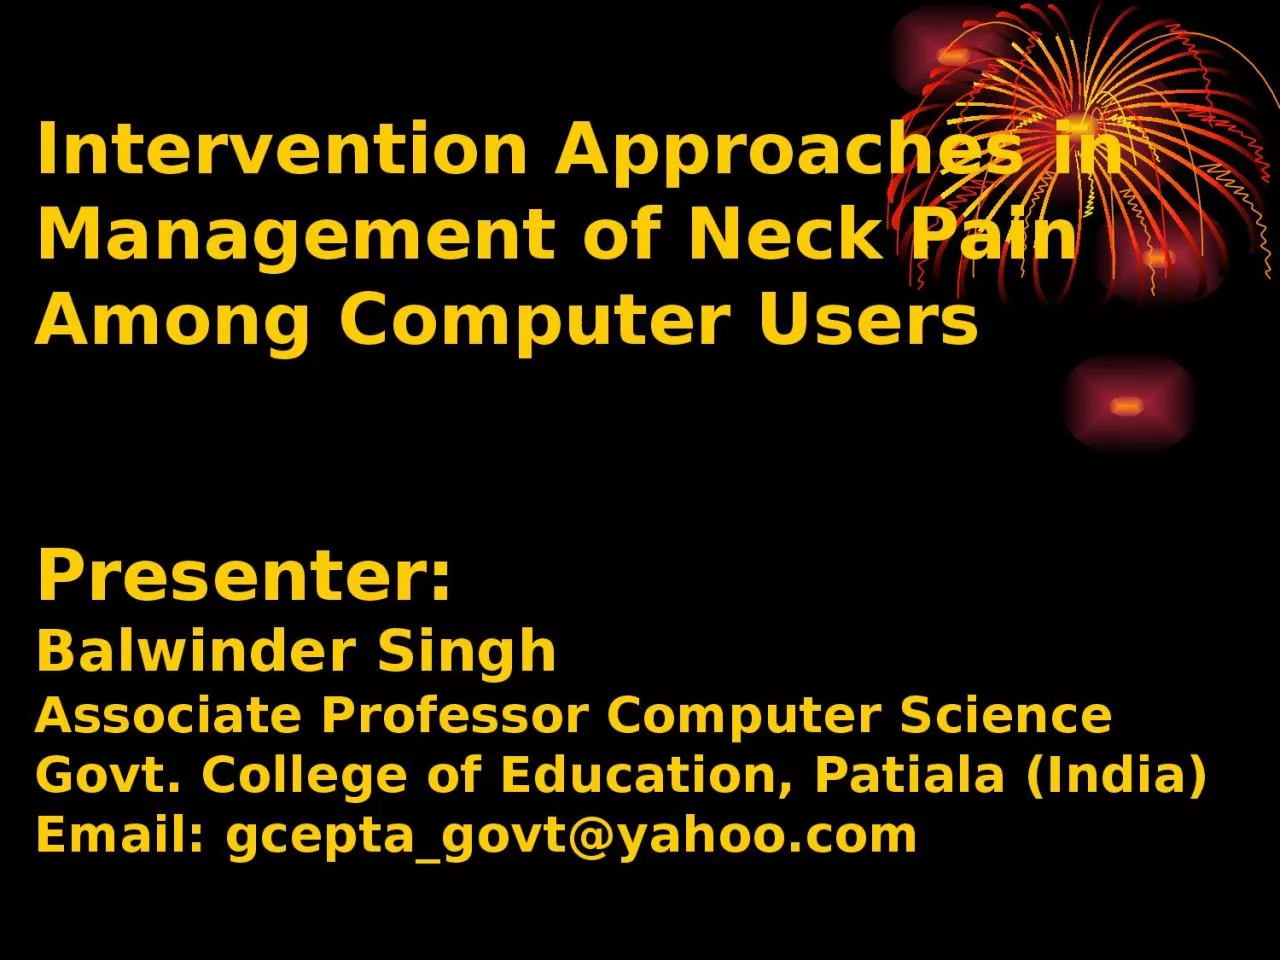 Intervention Approaches in Management of Neck Pain Among Computer Users